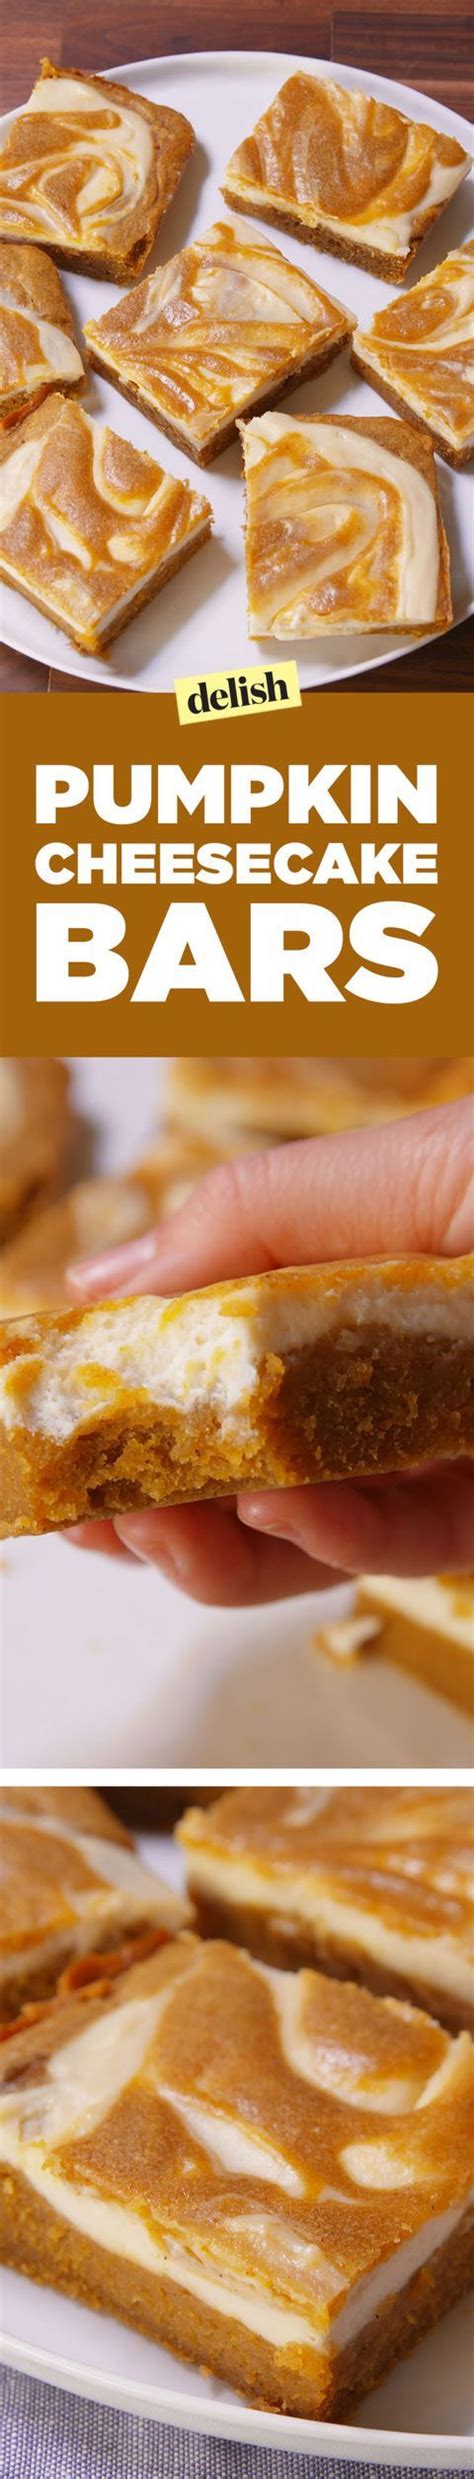 hey psl lovers these pumpkin cheesecake bars are your new favorite